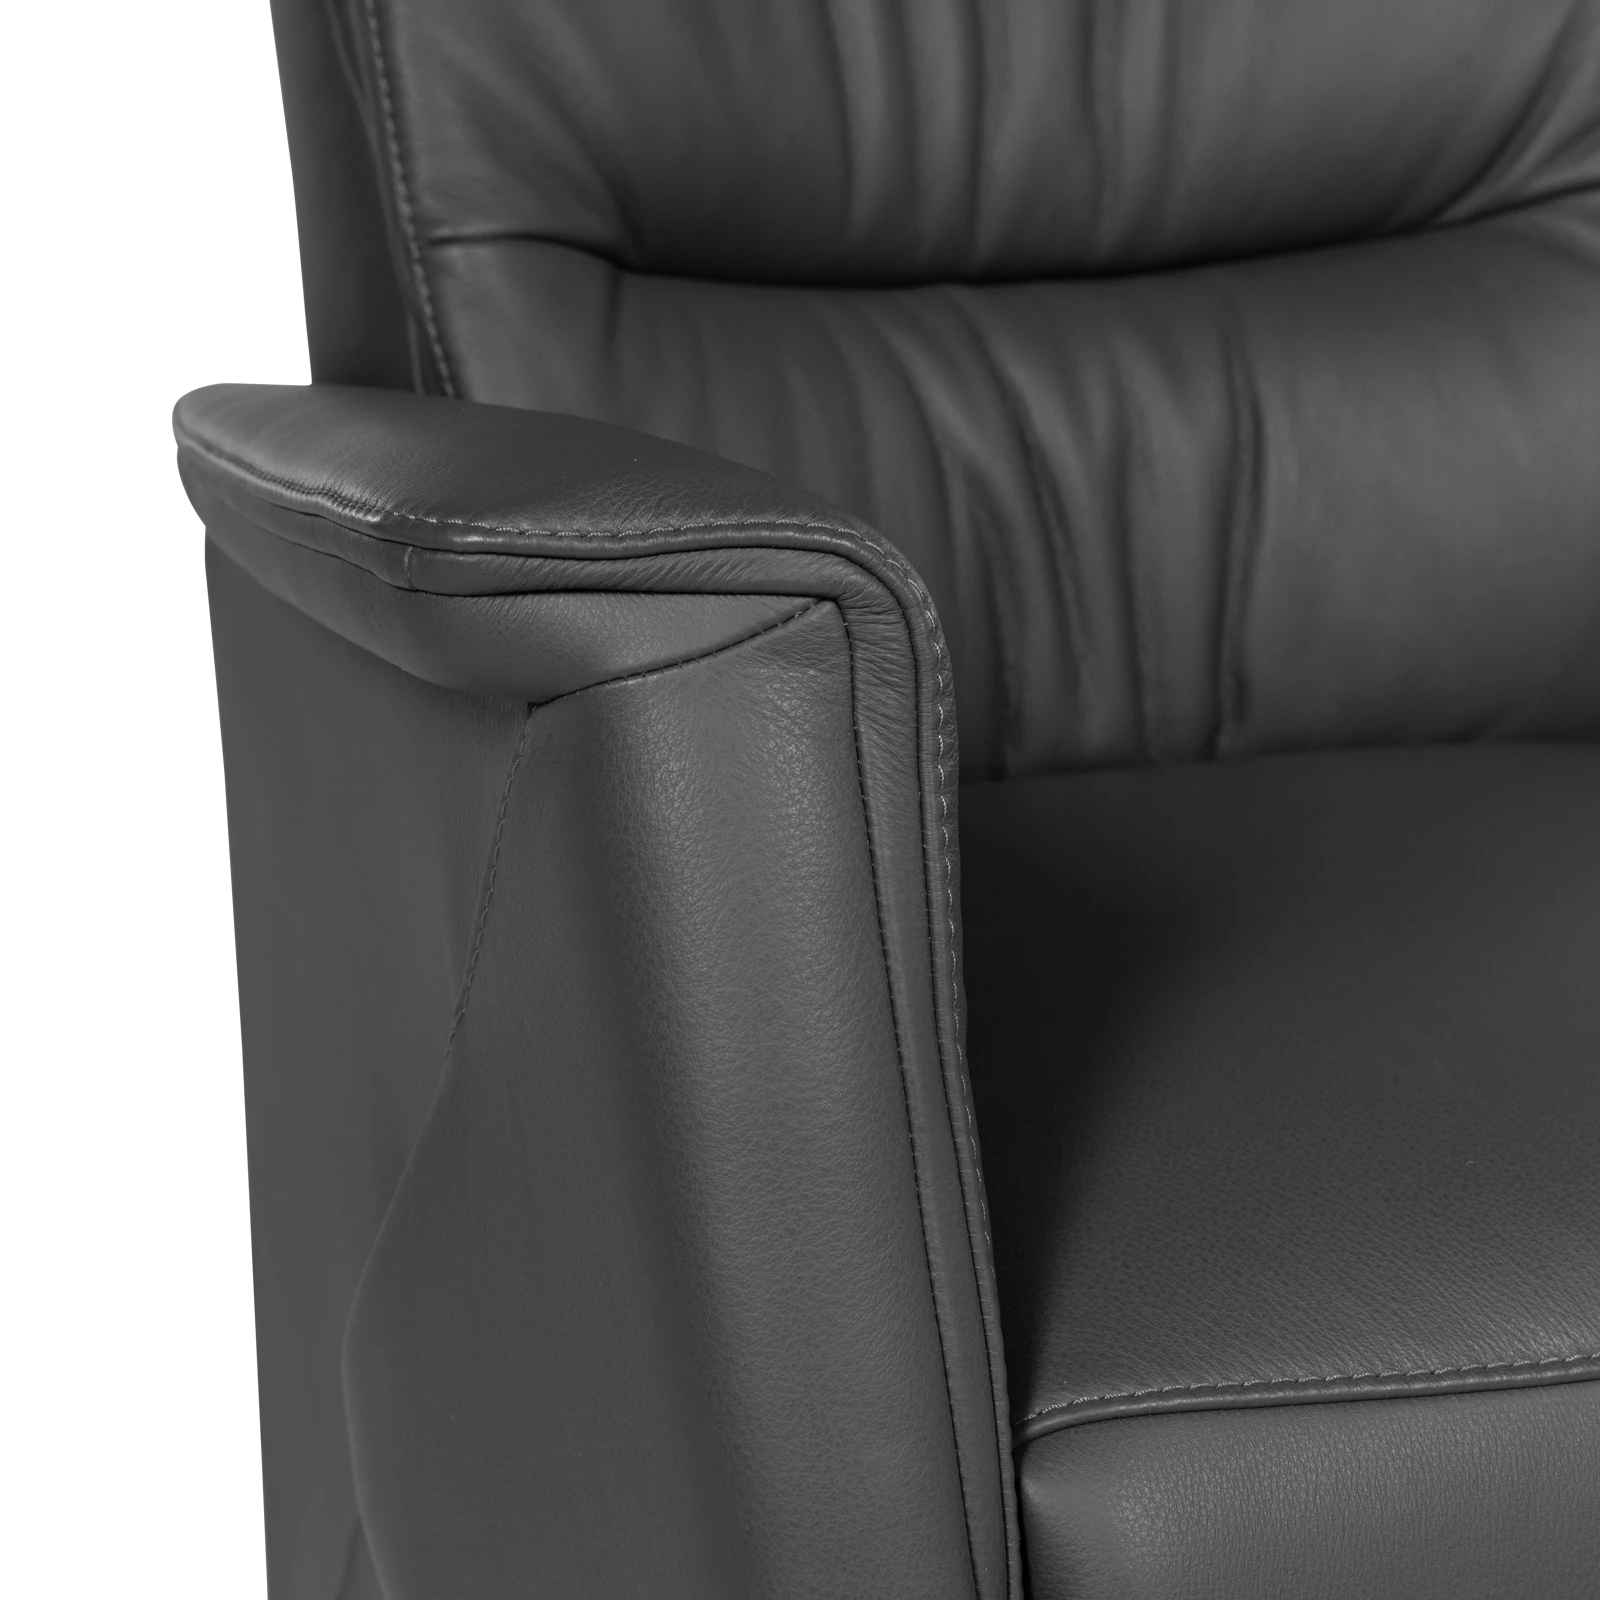 Relaxfauteuil (small) Lounge - Massif Antraciet